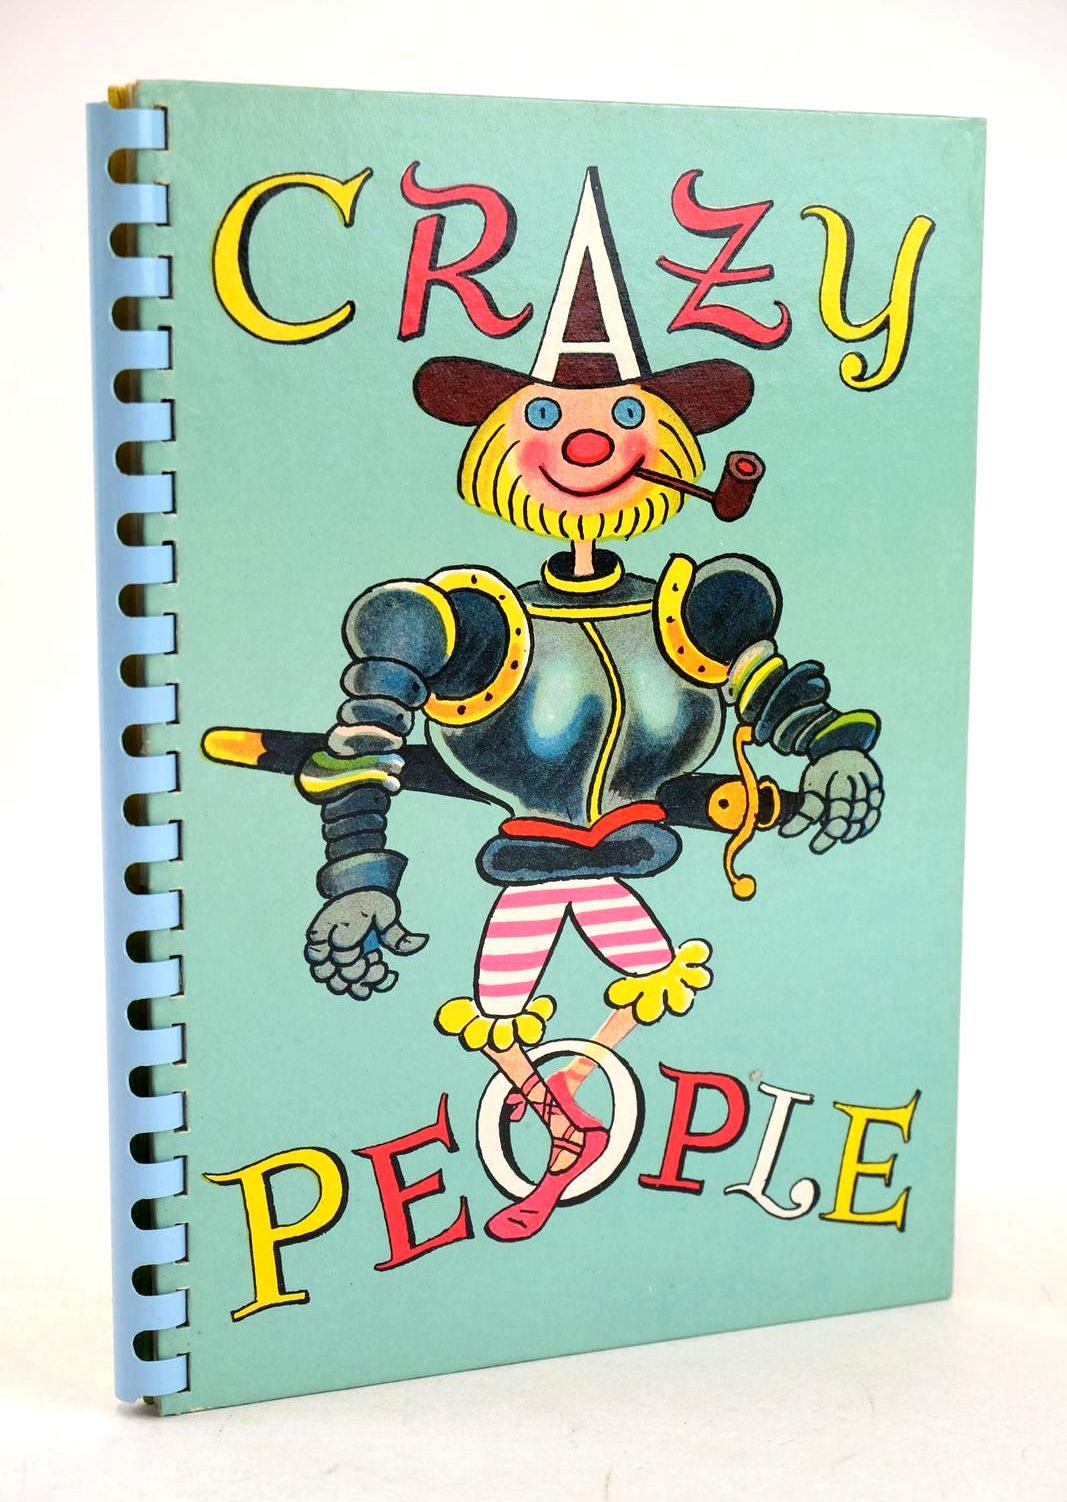 Photo of 8192 CRAZY PEOPLE illustrated by Trier, Walter published by Atrium Press Ltd. (STOCK CODE: 1326712)  for sale by Stella & Rose's Books